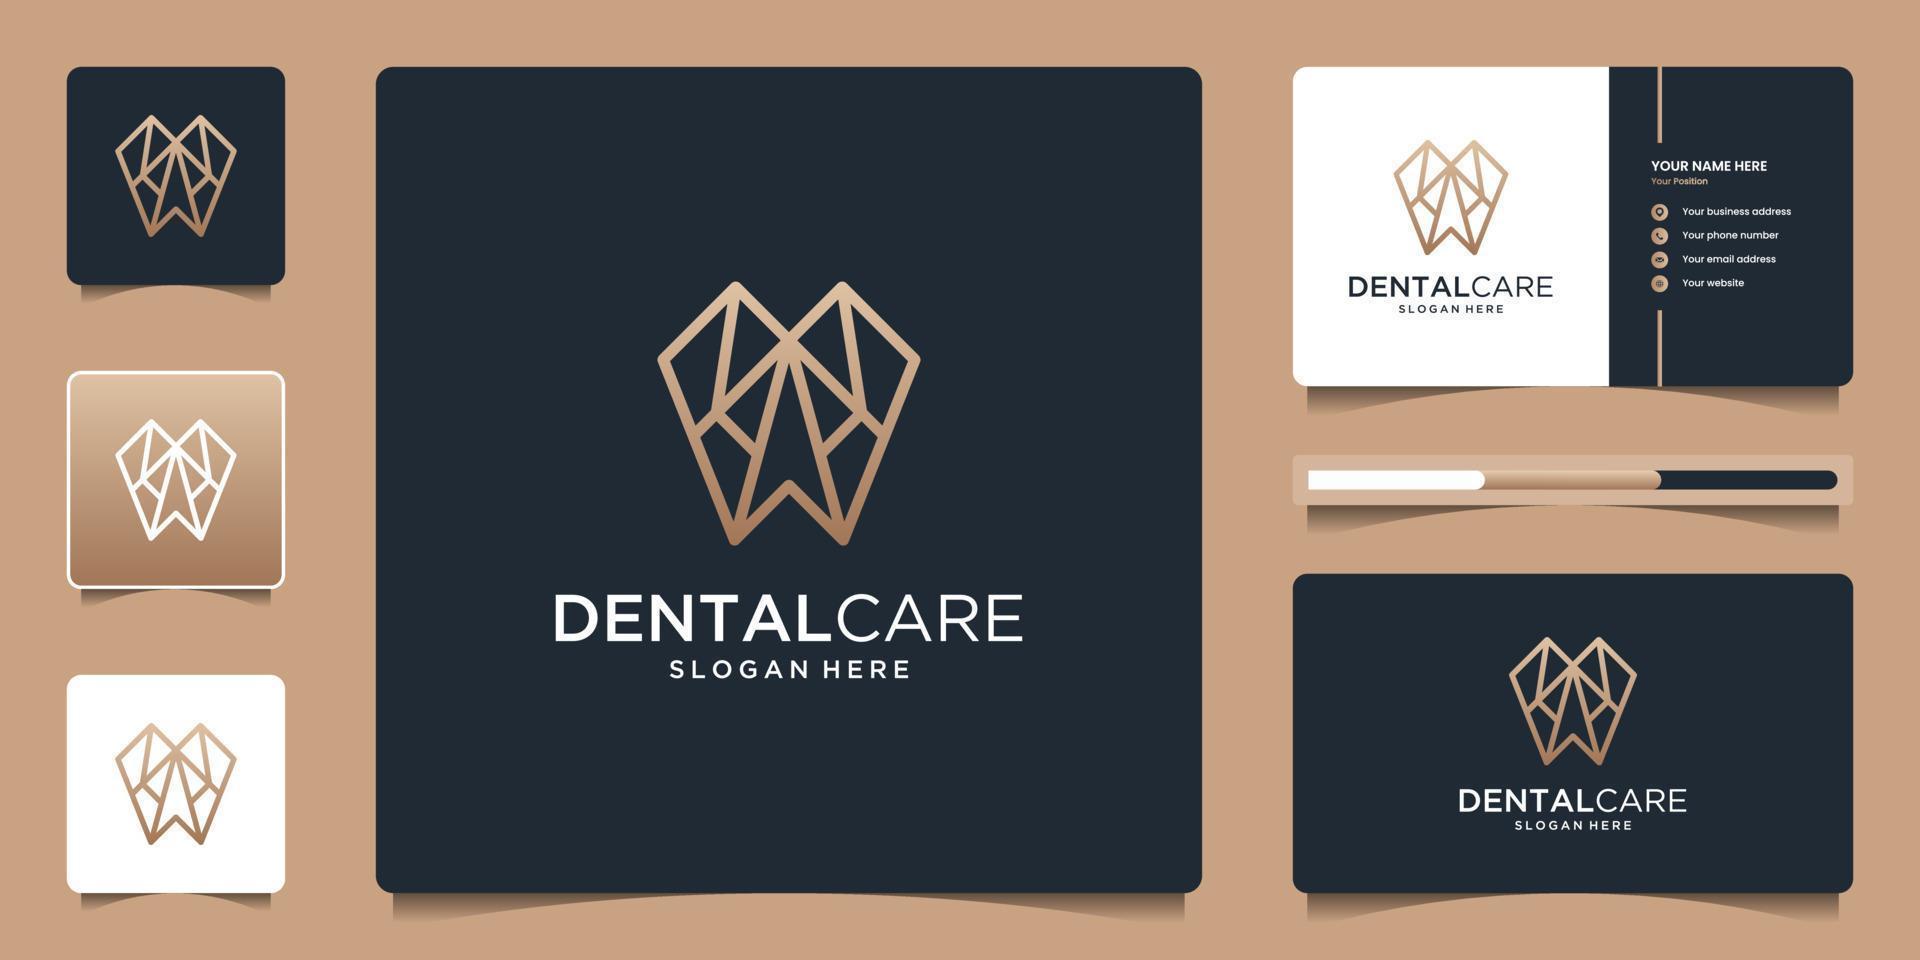 Geometric dental care logo for dentistry symbol icon design and business card template vector